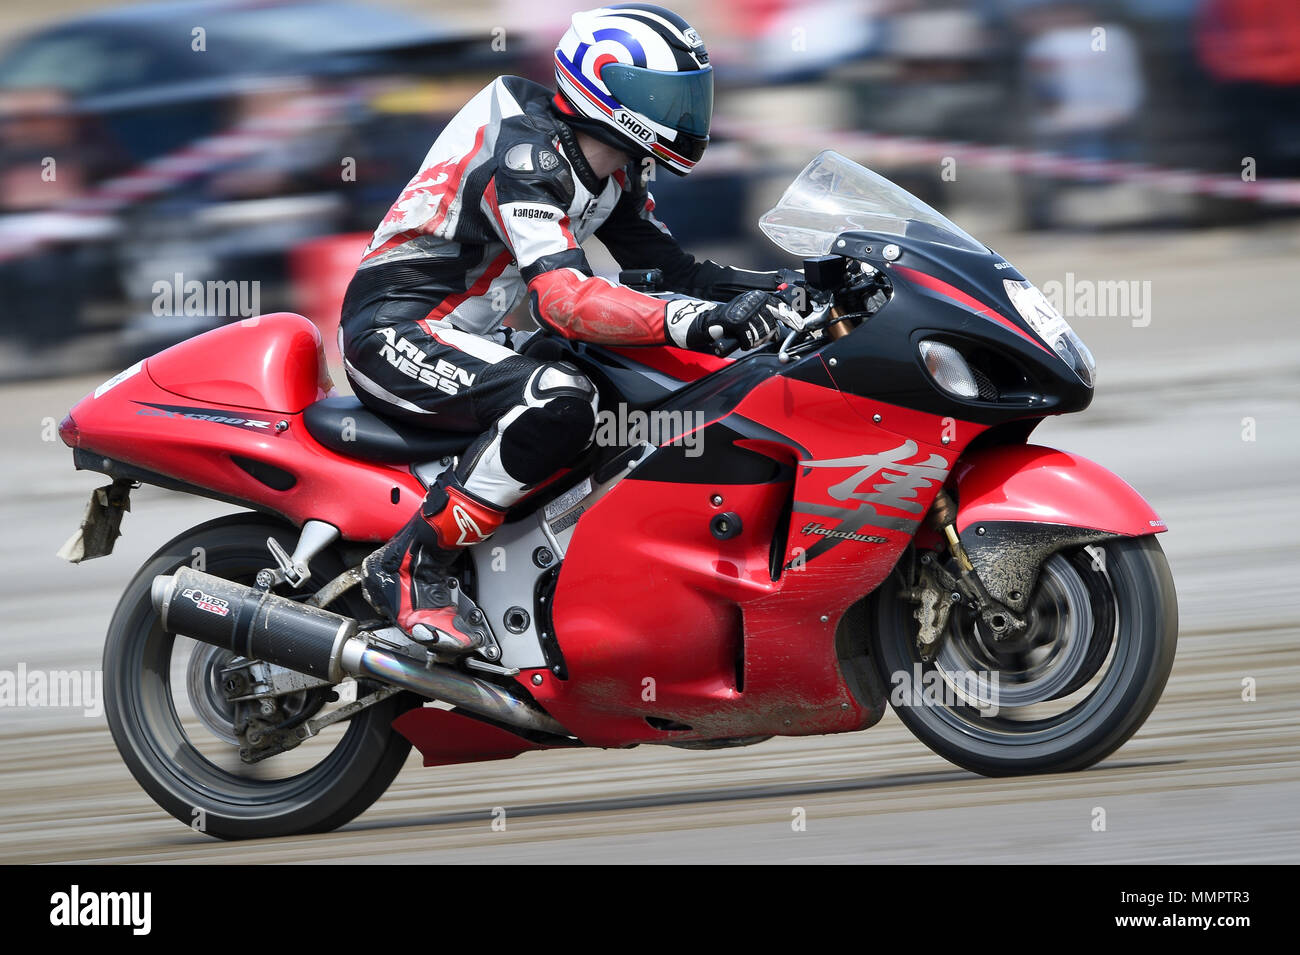 A competitor on a Suzuki Hayabusa motorbike takes part in the annual UK, European and World land speed event organised by Straightliners, at Pendine Sands, Wales, where riders and drivers of all vehicle types compete in classes for top speeds over a measured mile on the beach. Stock Photo